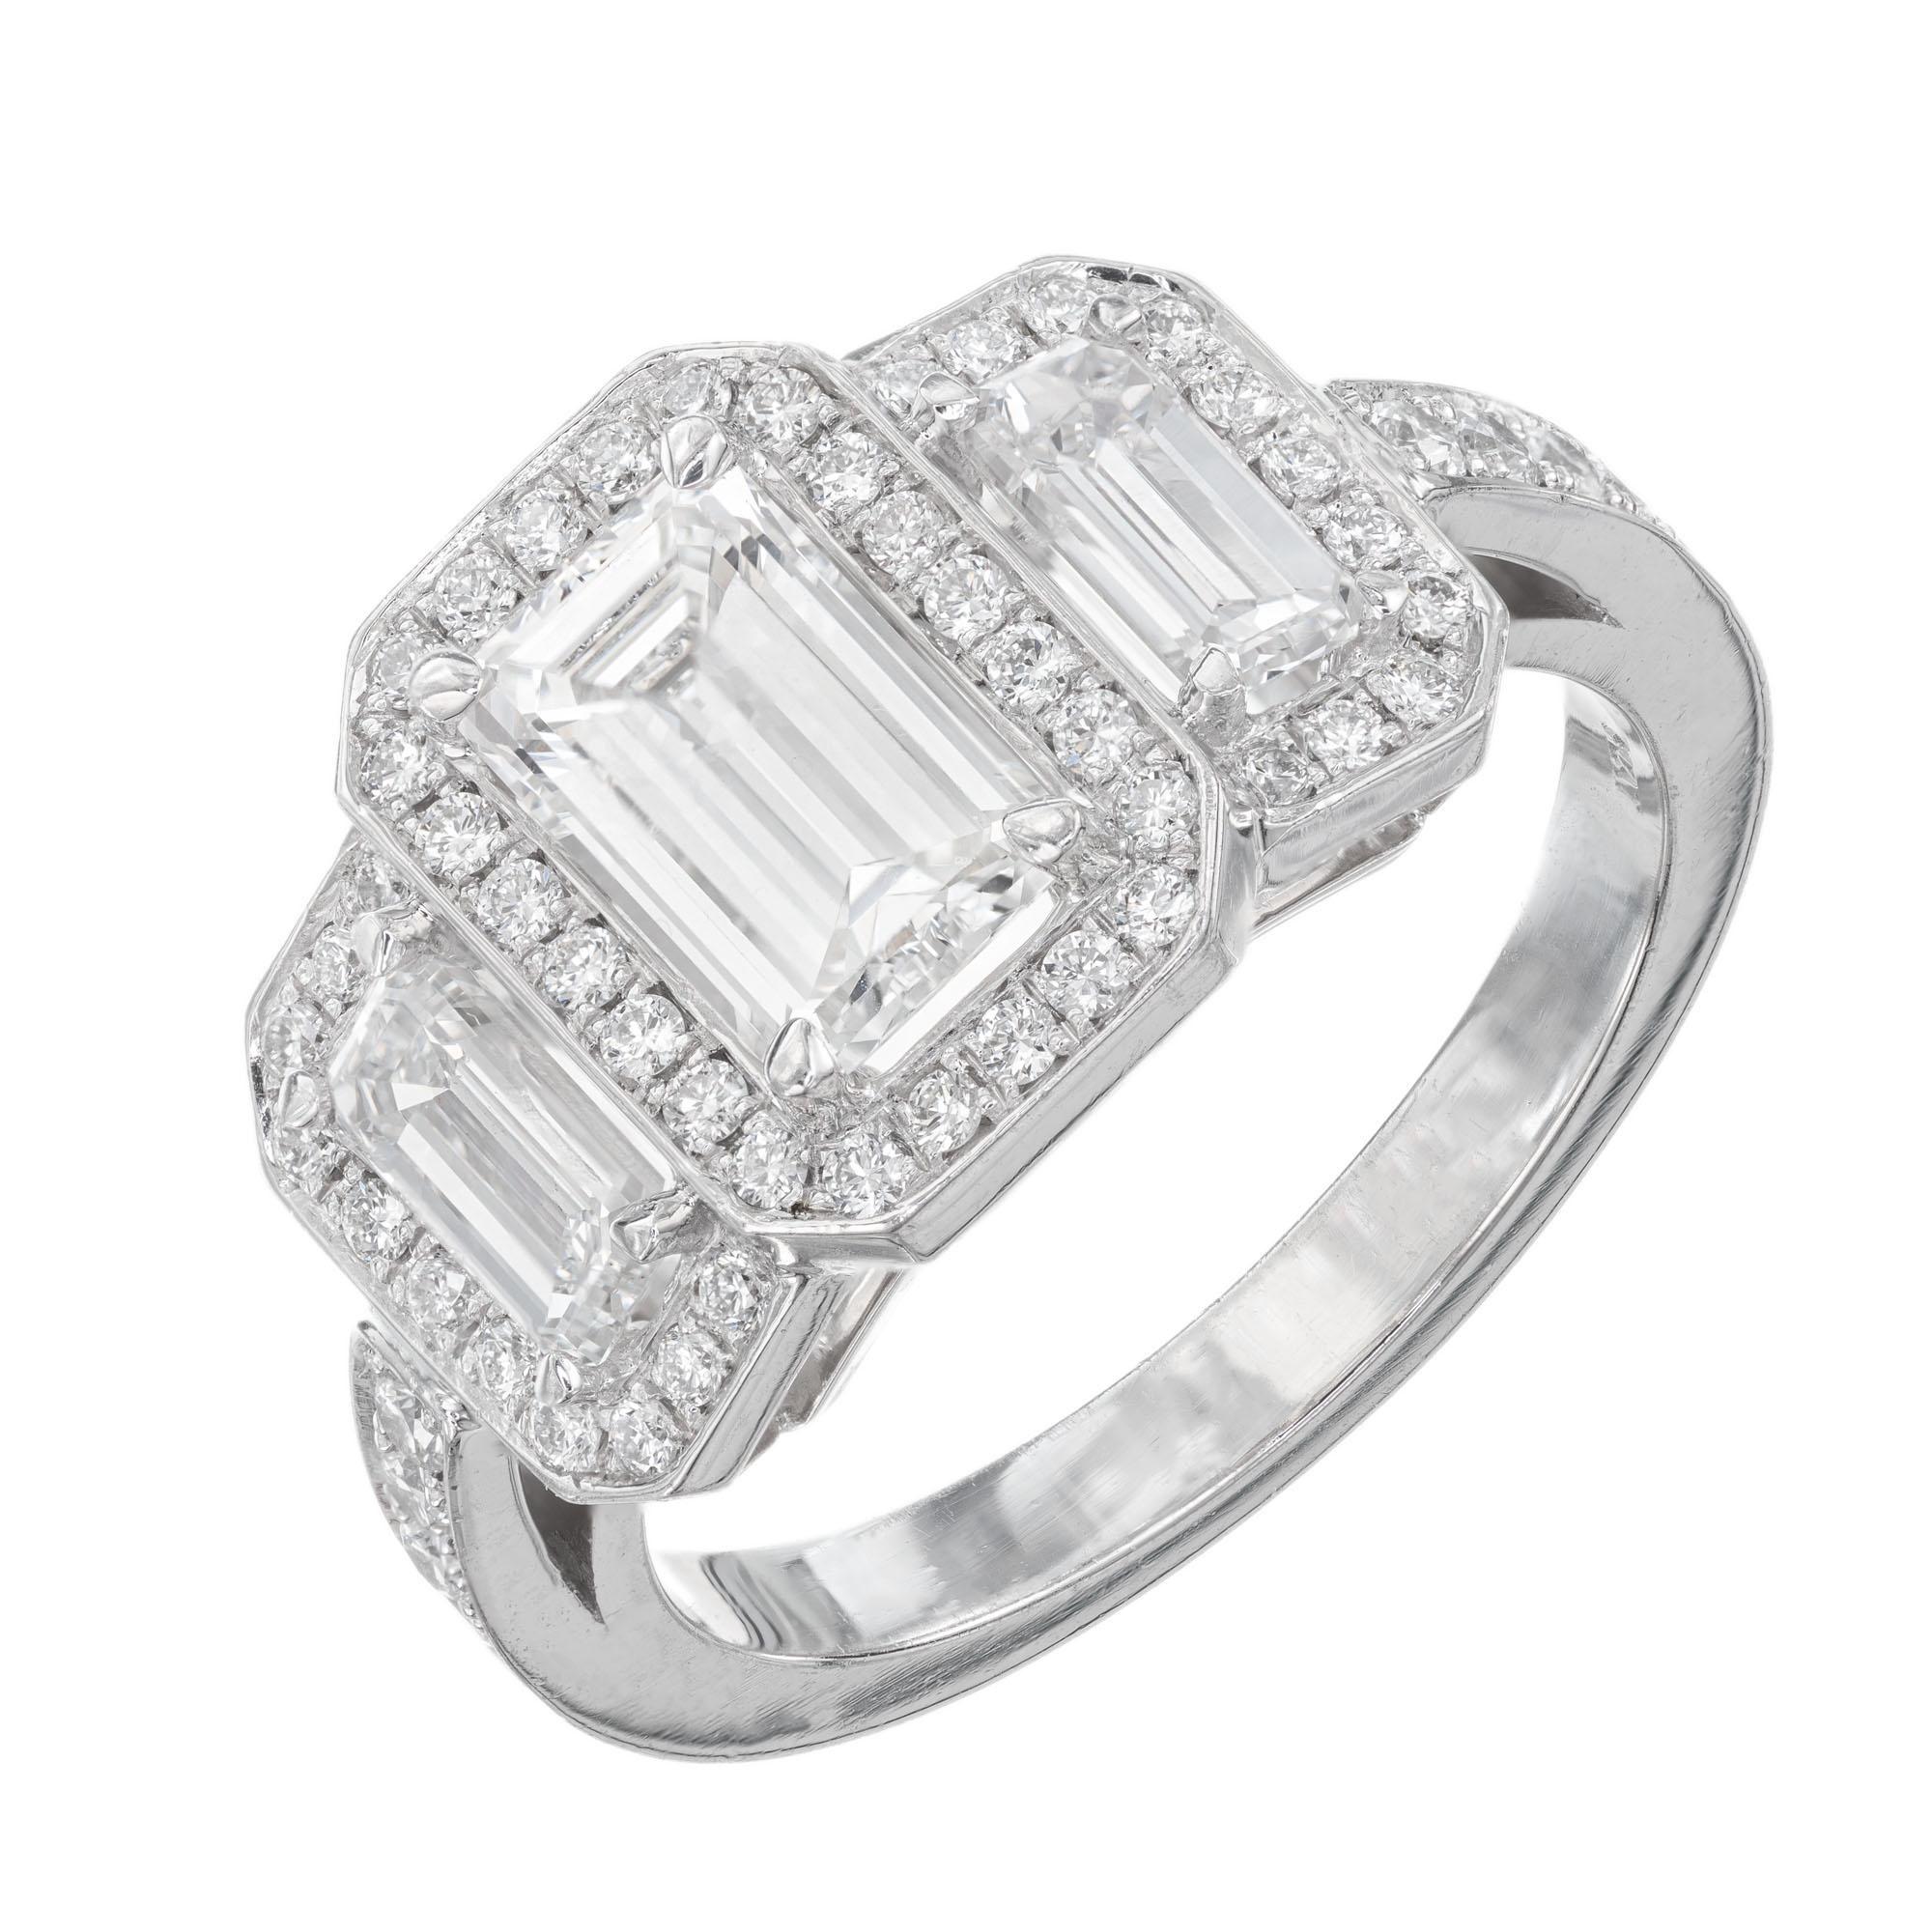 Diamond halo engagement ring. Emerald cut center diamond with matching emerald cut side diamonds with triple halo of 56 round cut diamonds in a three-stone platinum setting. GIA certified. Created in the Peter Suchy Workshop. 

1 Emerald cut